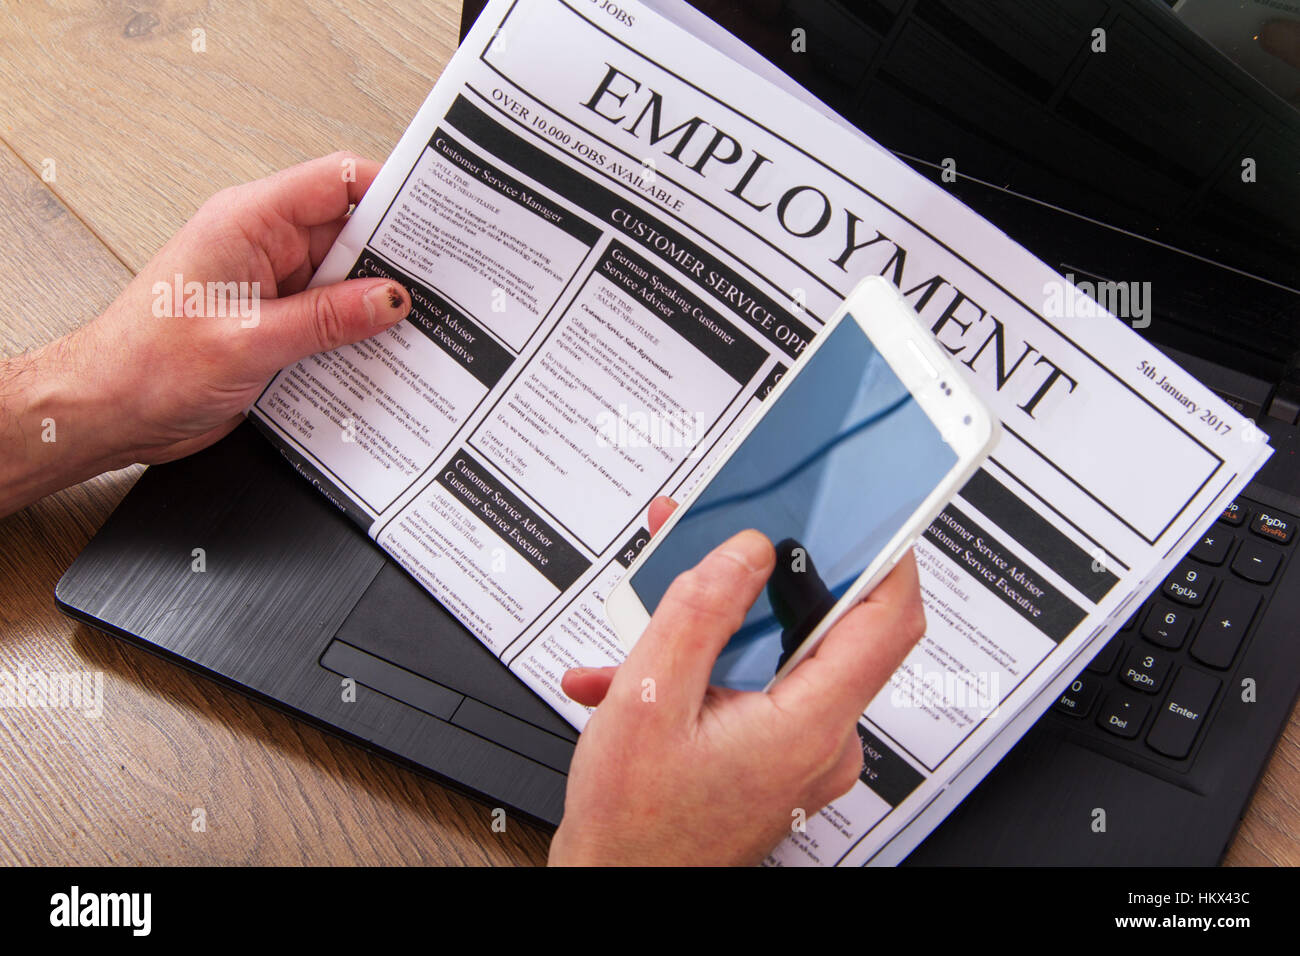 Searching for a new job or employment in a newspaper Stock Photo